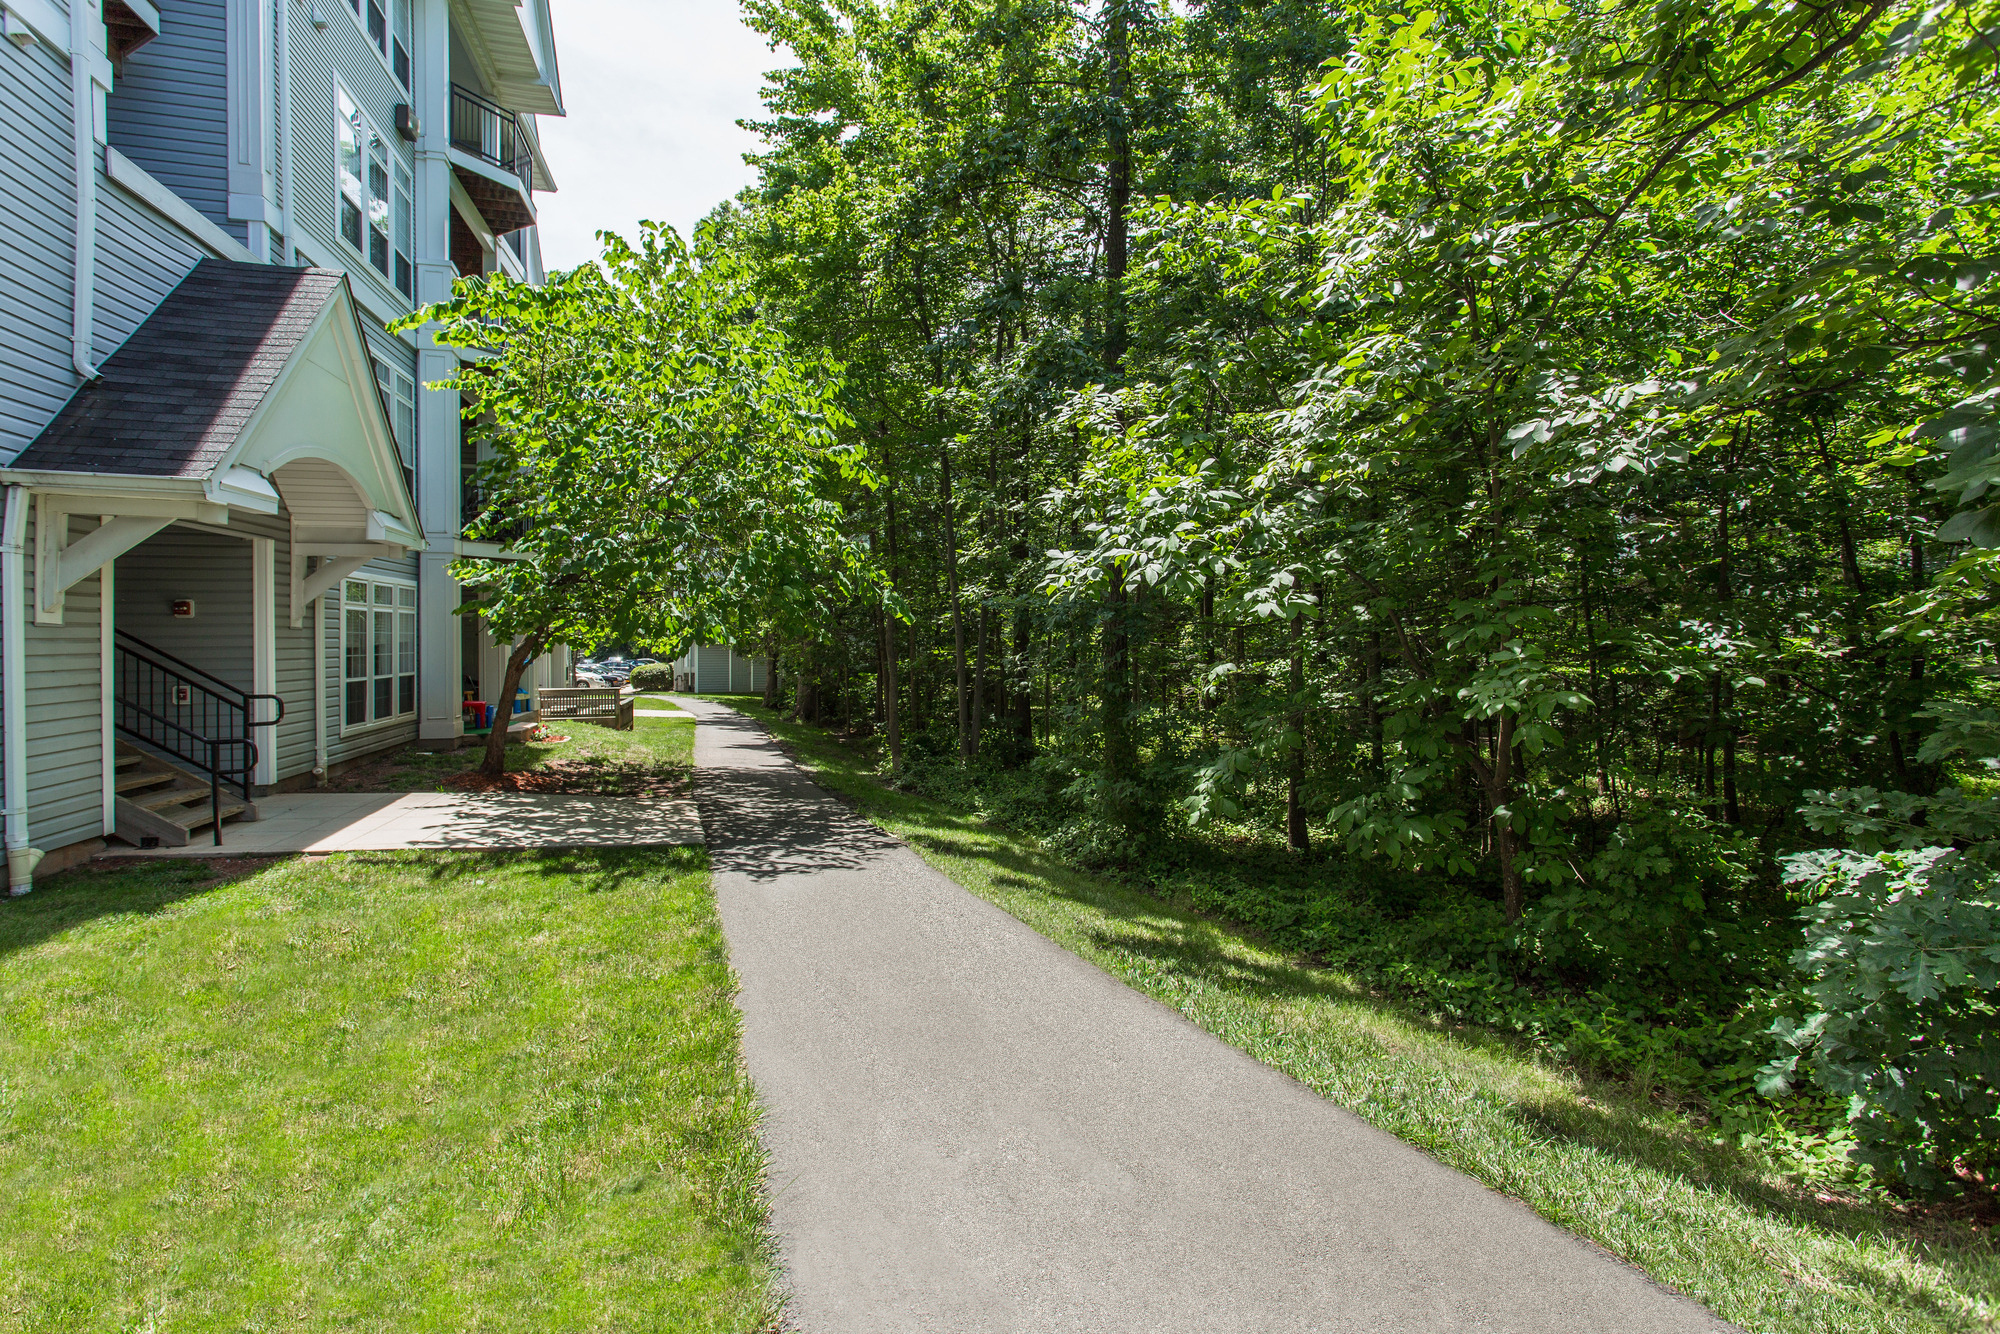 scenic wooded area with walking path next to apartment buildings - ashburn va luxury apartments